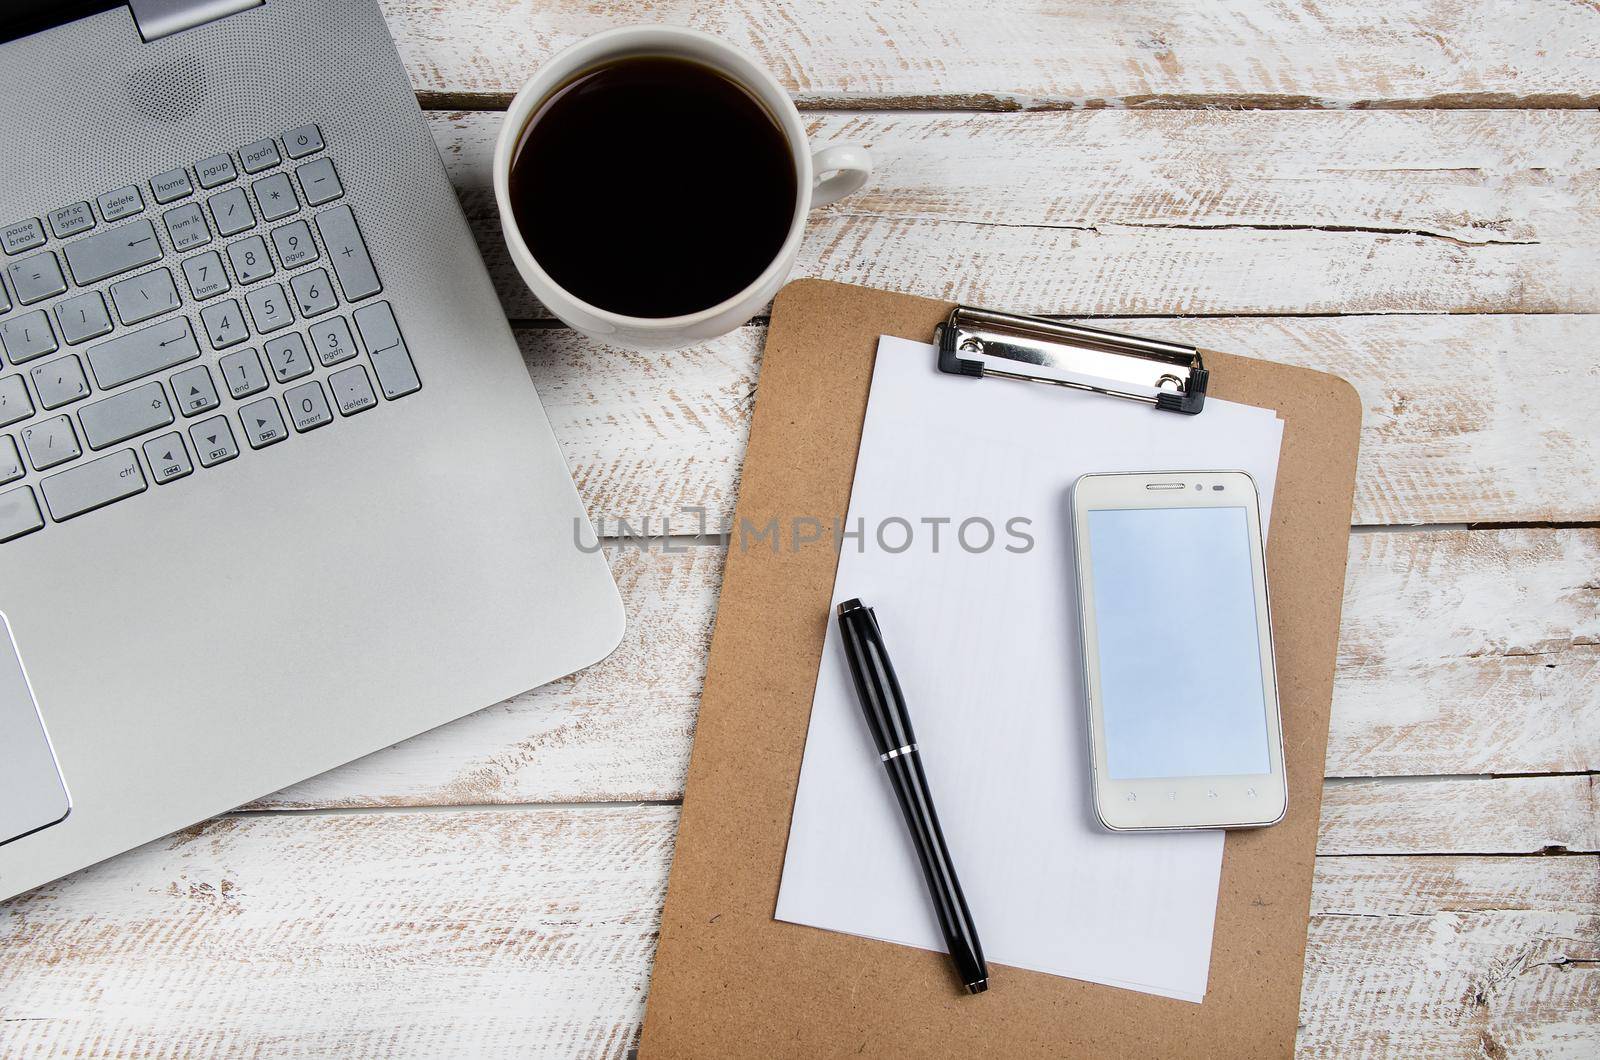 Cup of coffee and laptop on wooden table. Stock image.